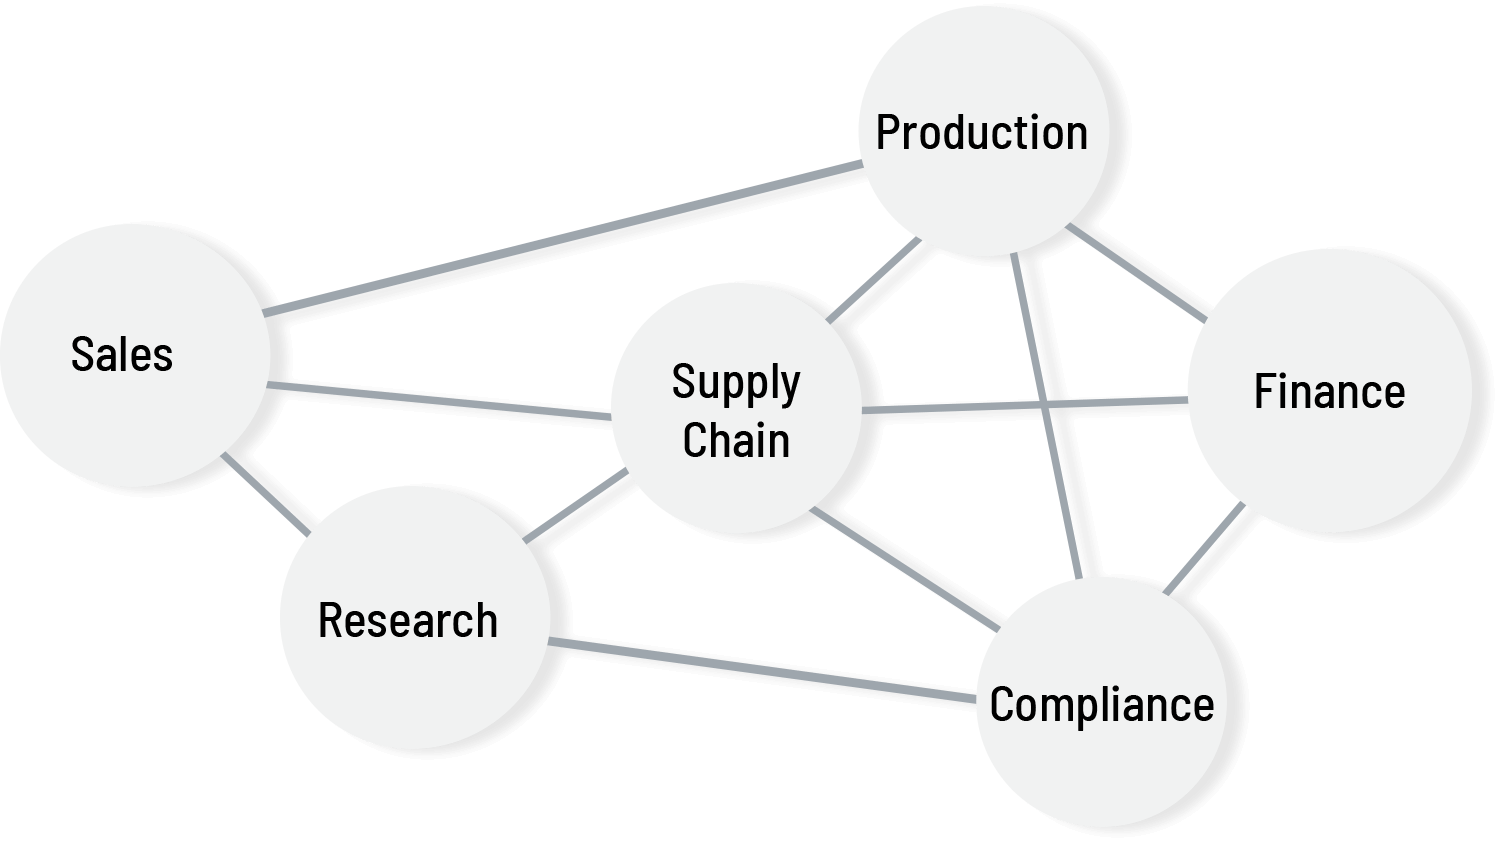 connections between sales, production, research, supply chain, finance, compliance